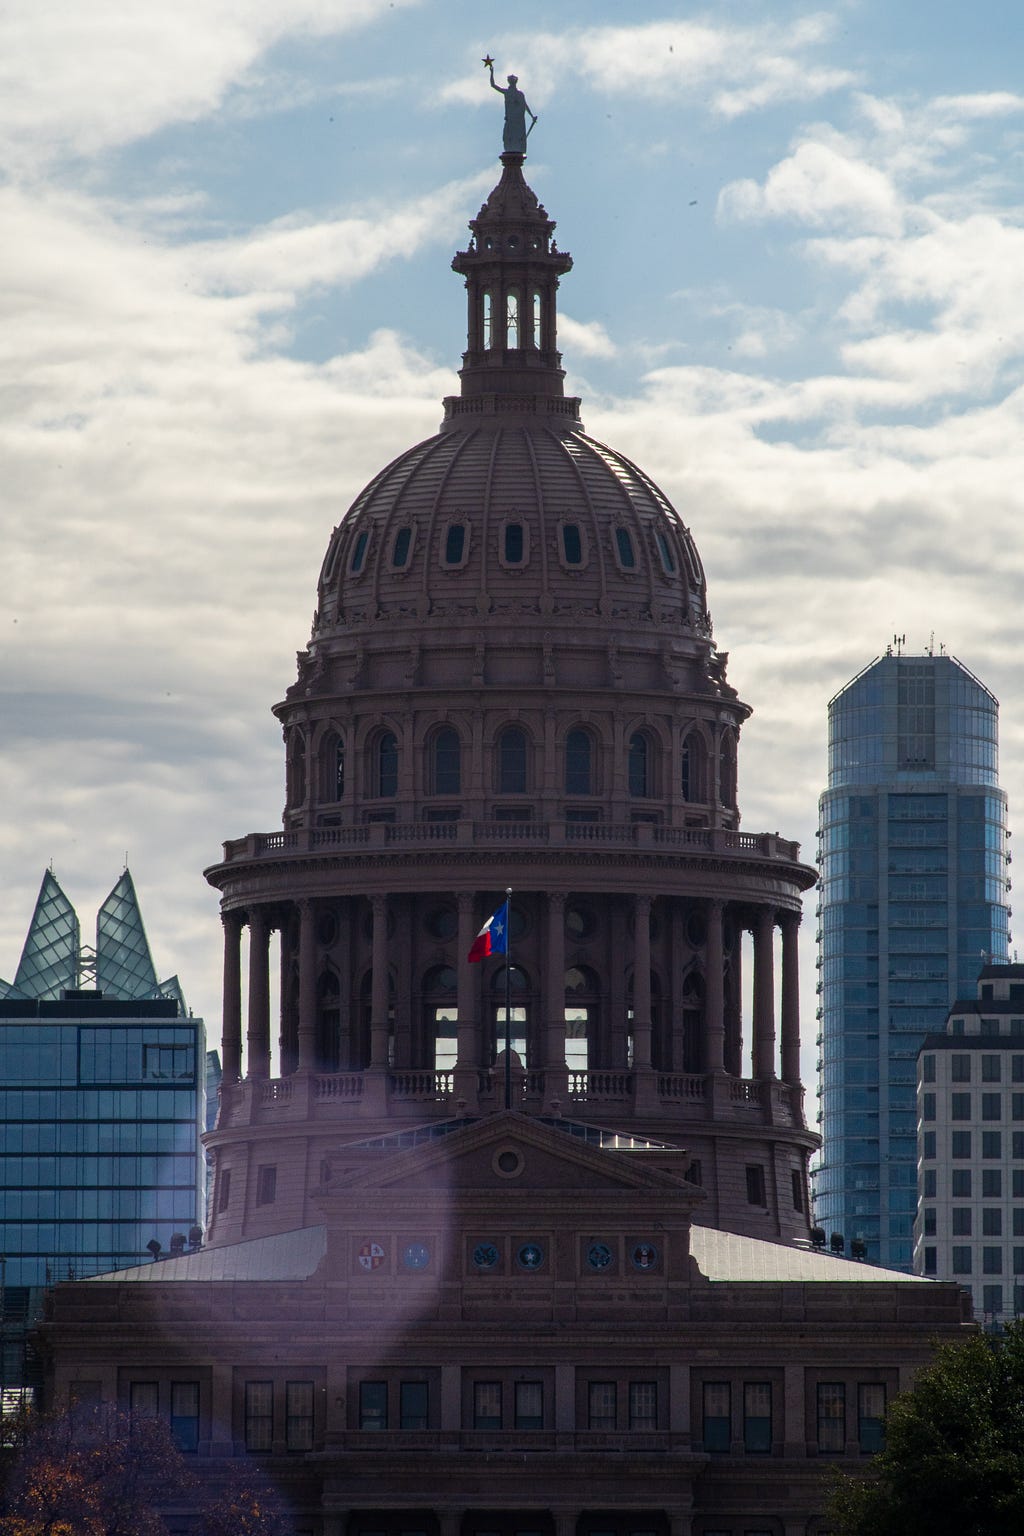 A telephoto picture of the top of the Texas State Capitol in Austin, Texas. The skyline looming in the background.